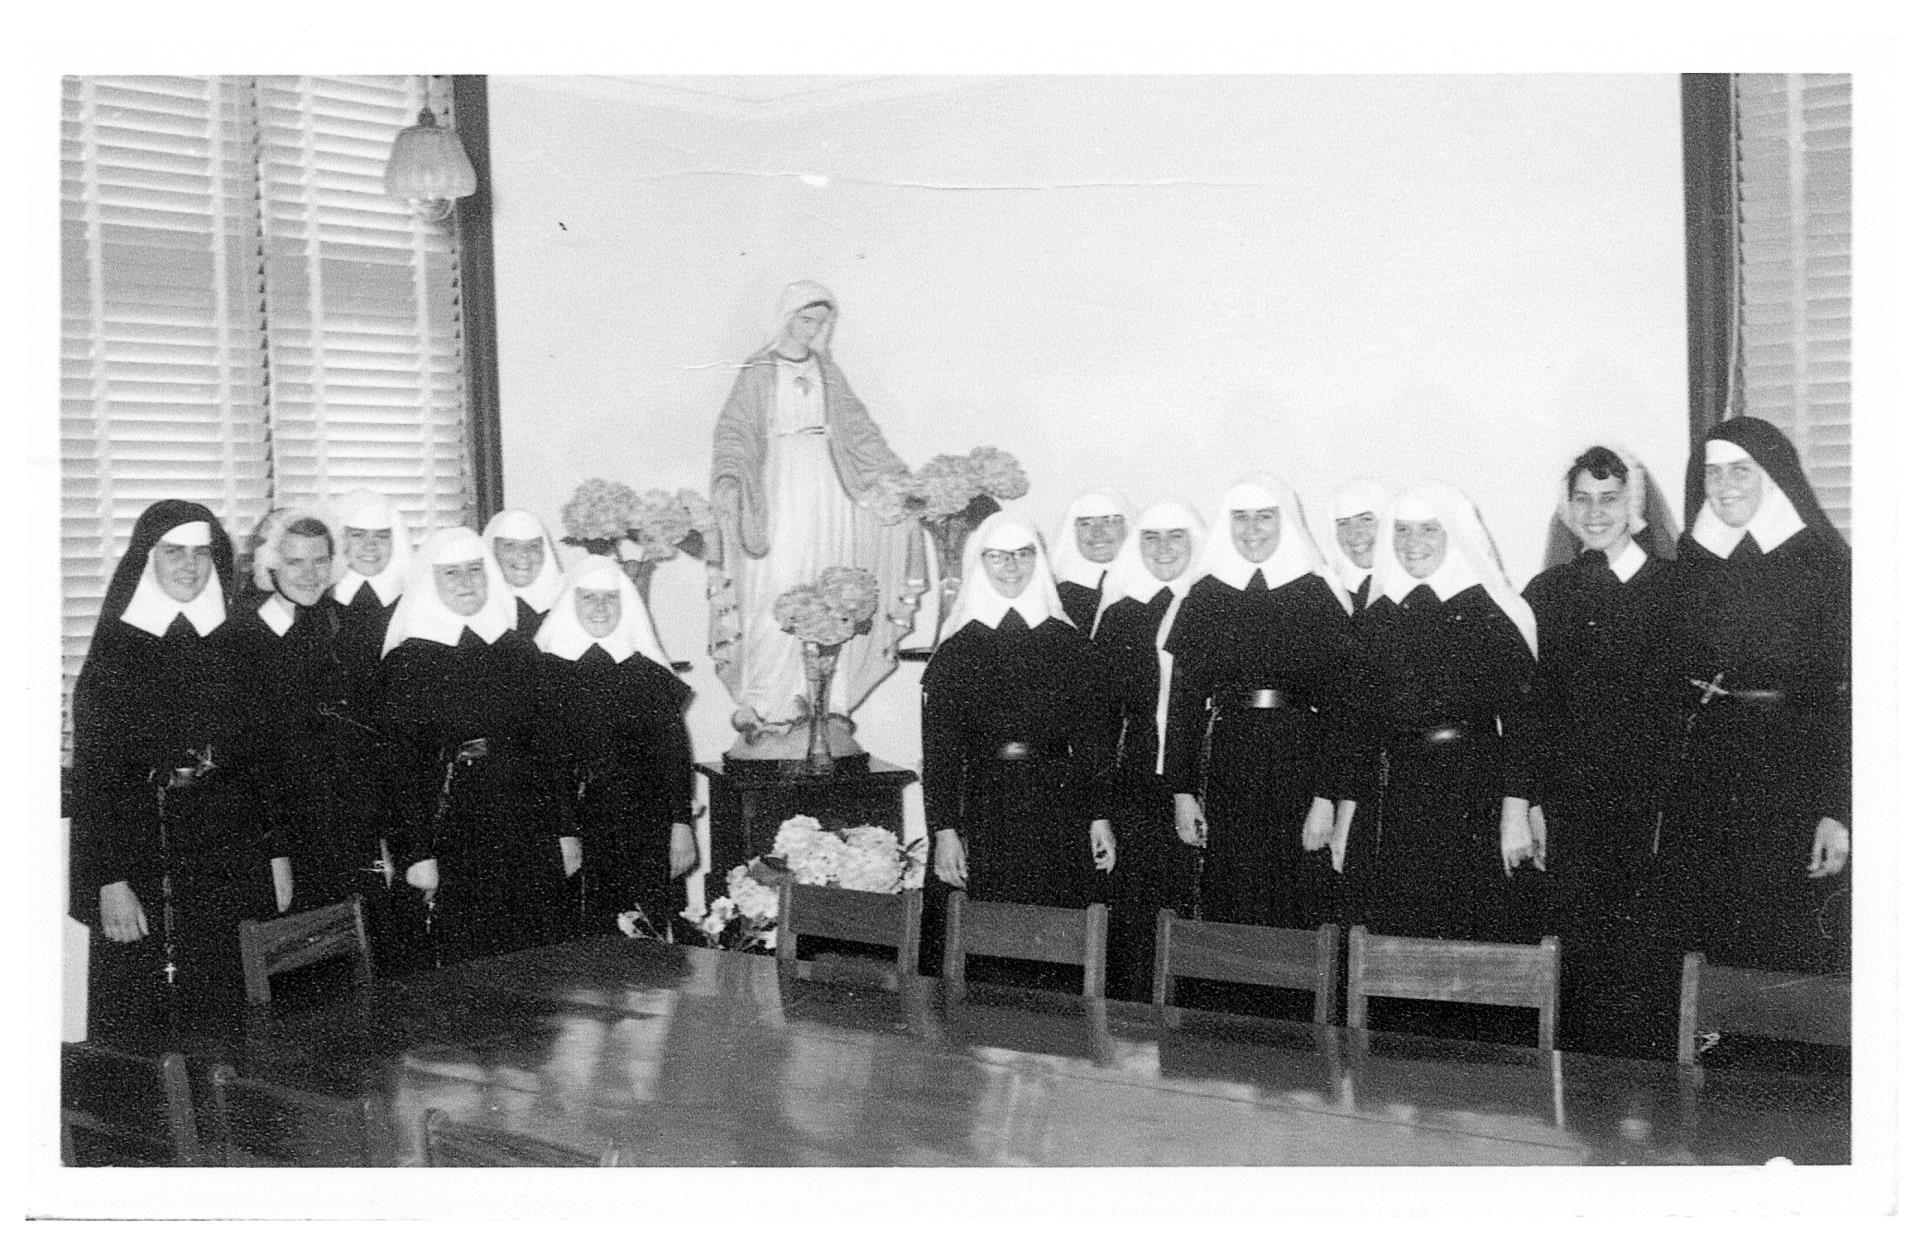 Sisters of Mercy at St Mary’s Convent, Leederville, 1955.  Sister Paula McAdam is on the right